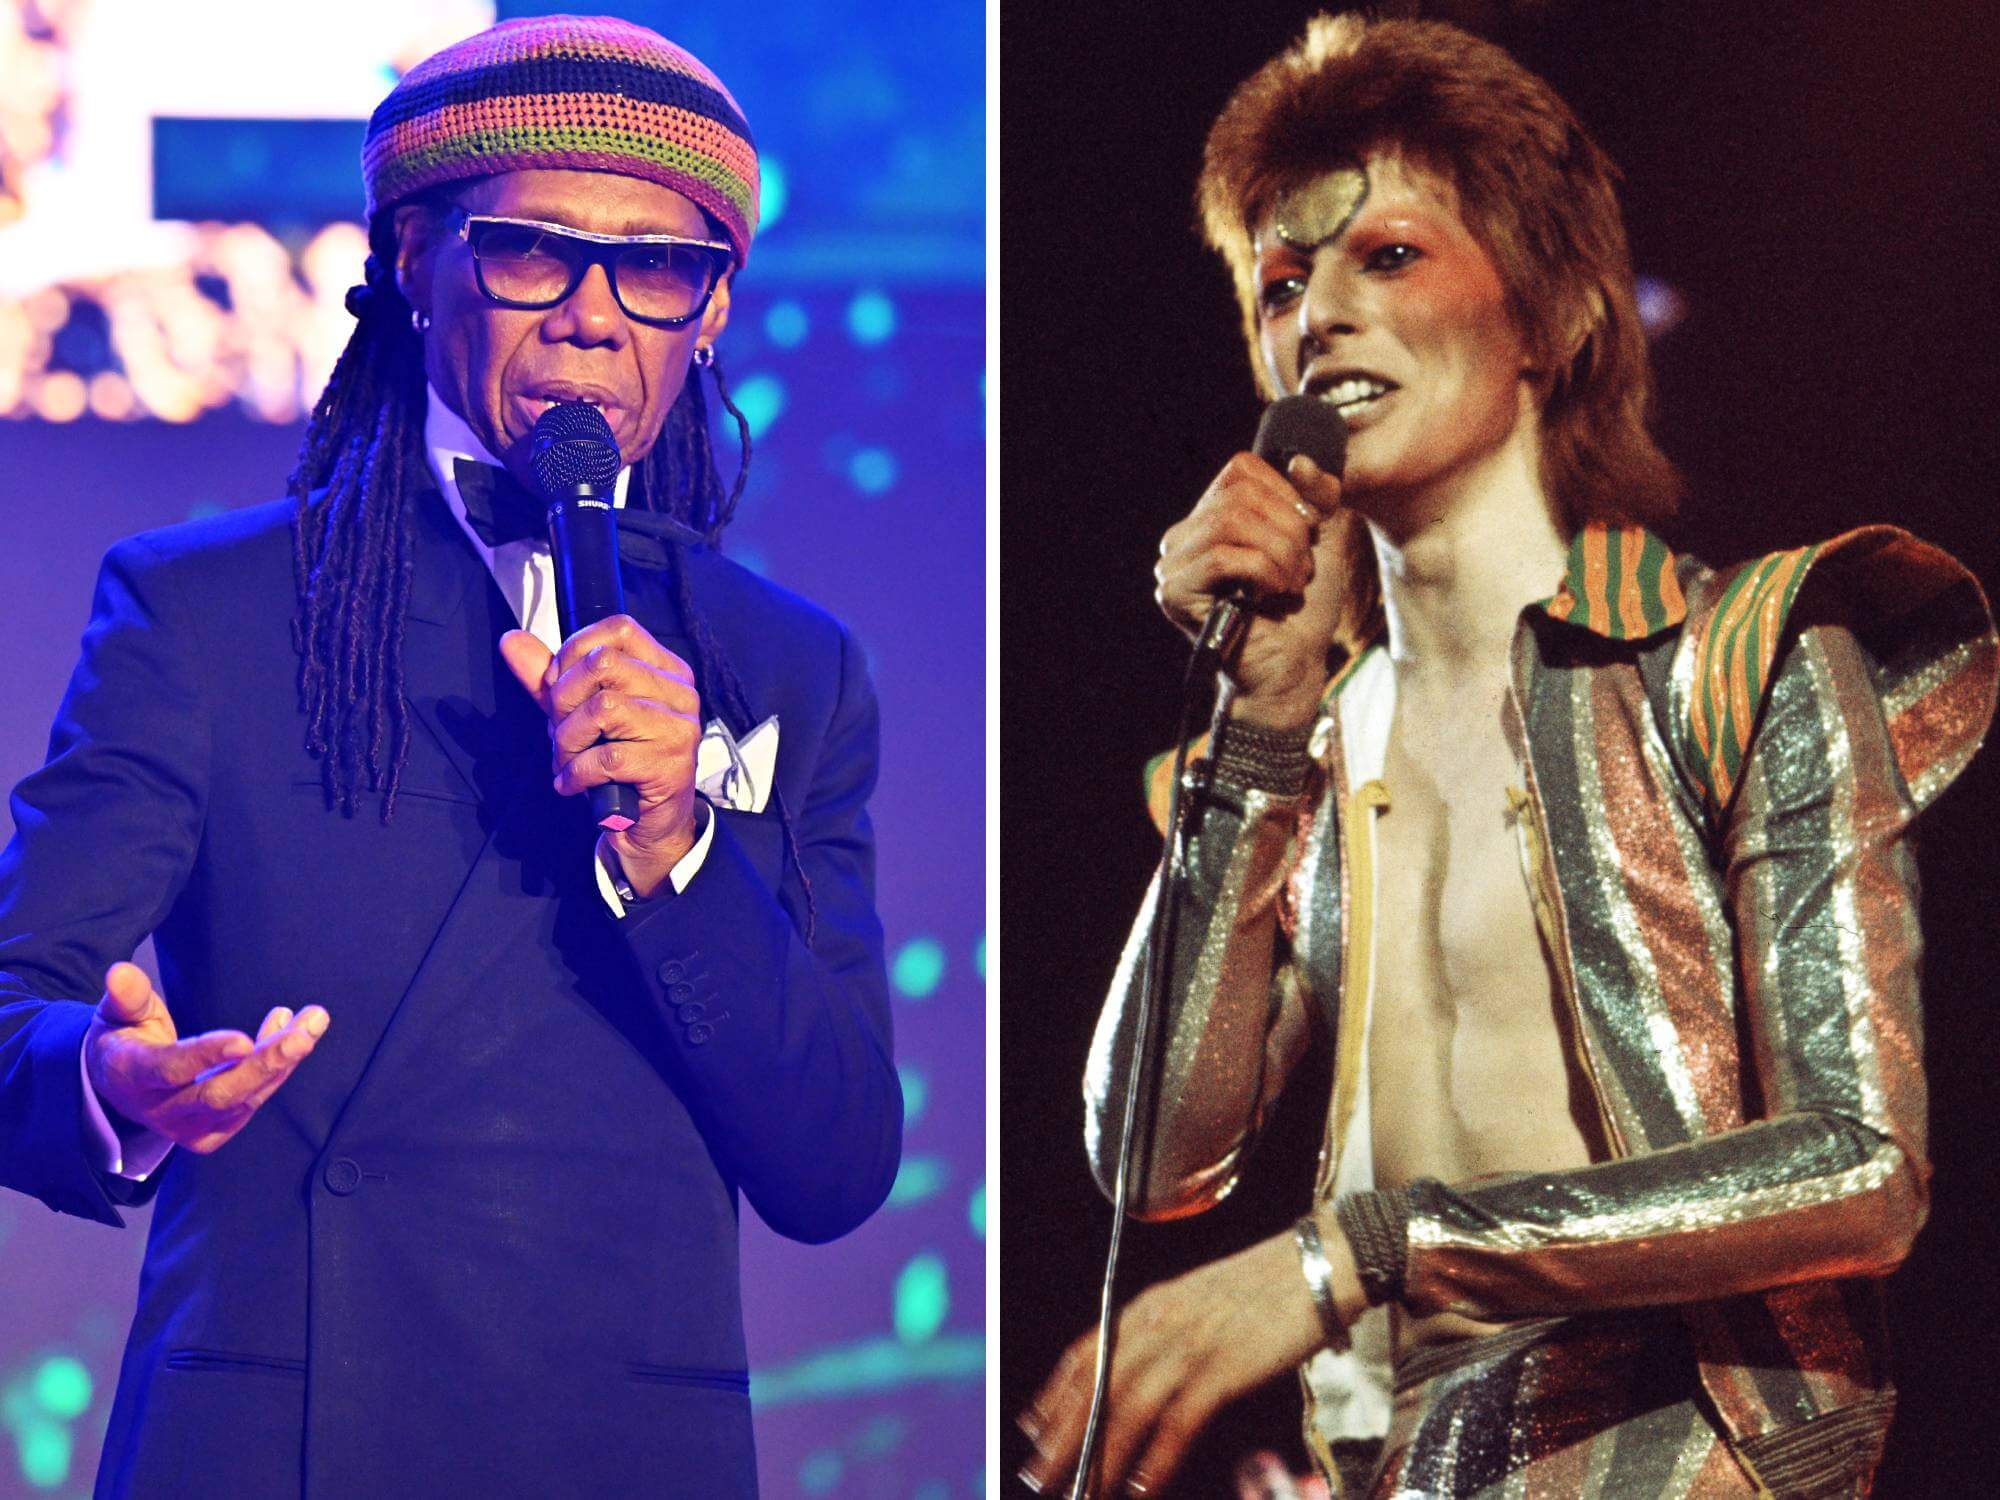 Nile Rodgers and david Bowie